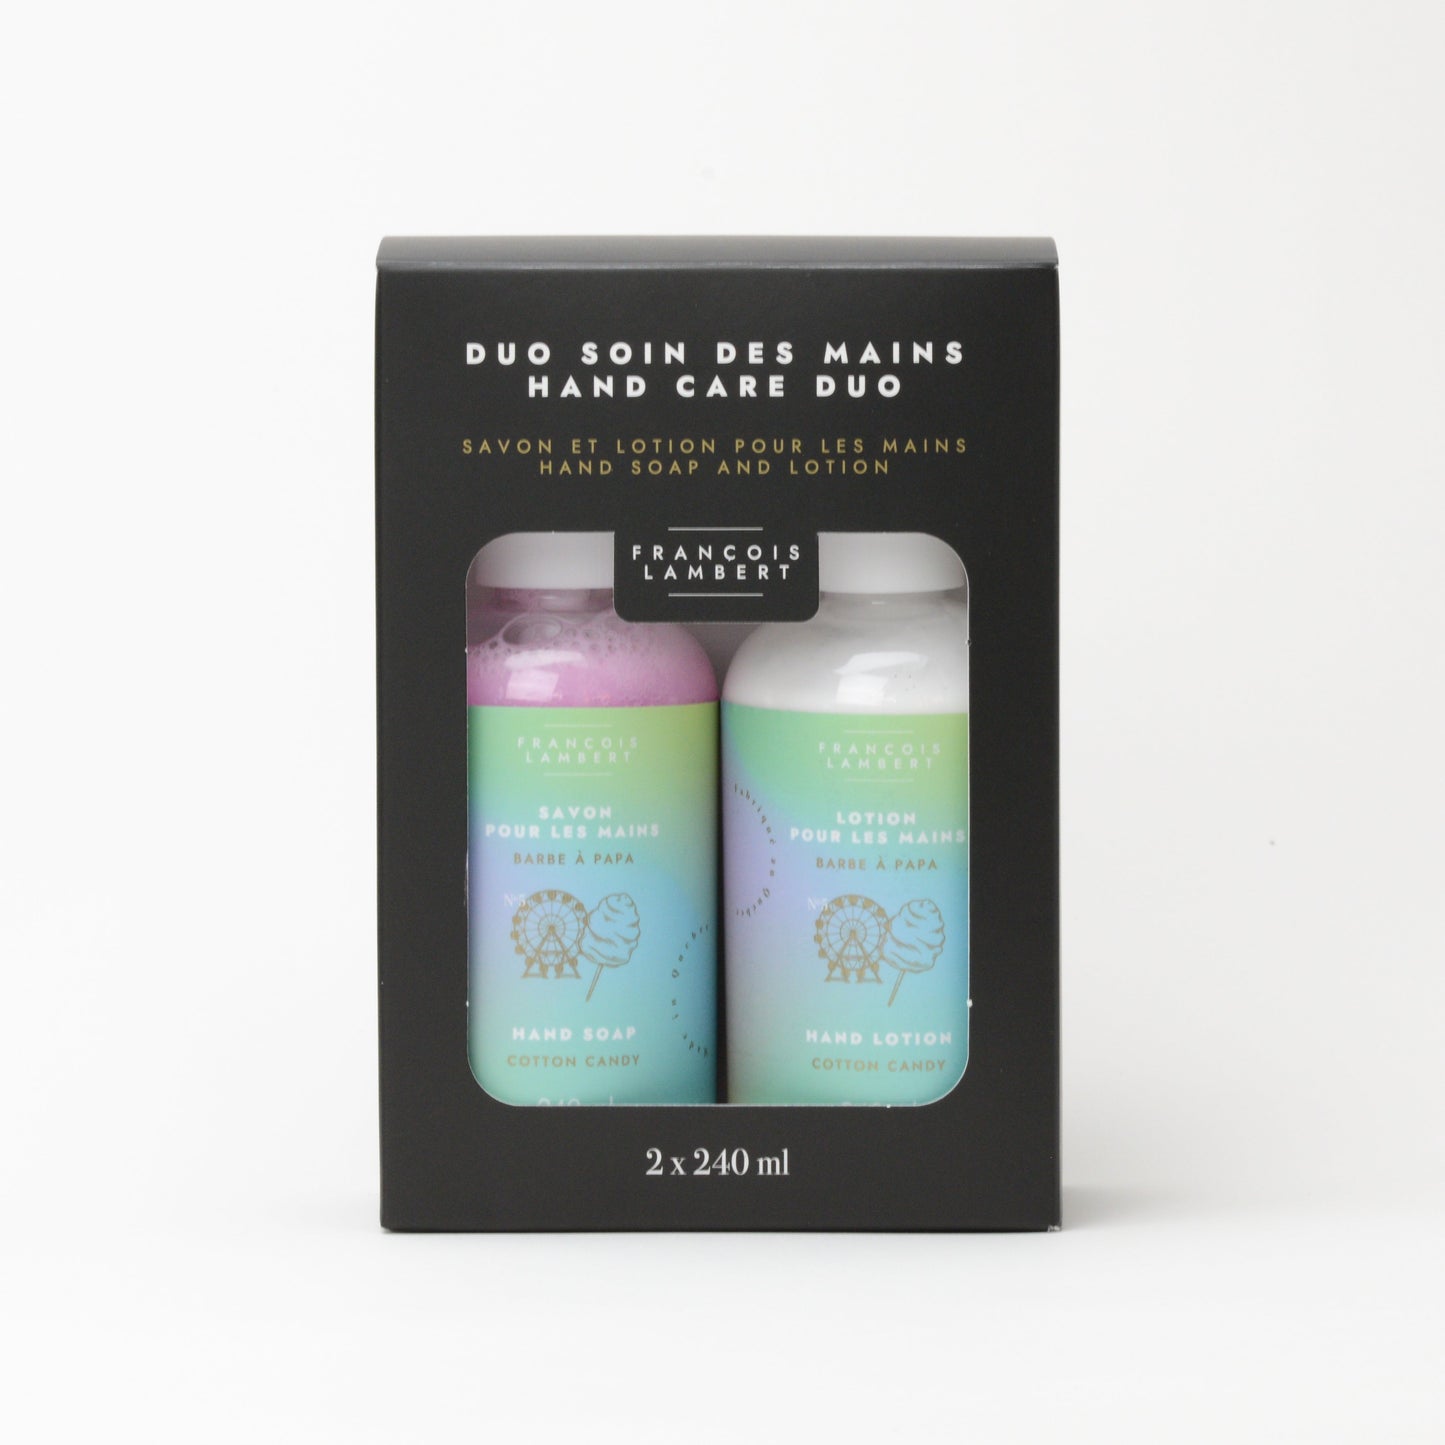 Hand Care Duo - Hand Soap and Lotion